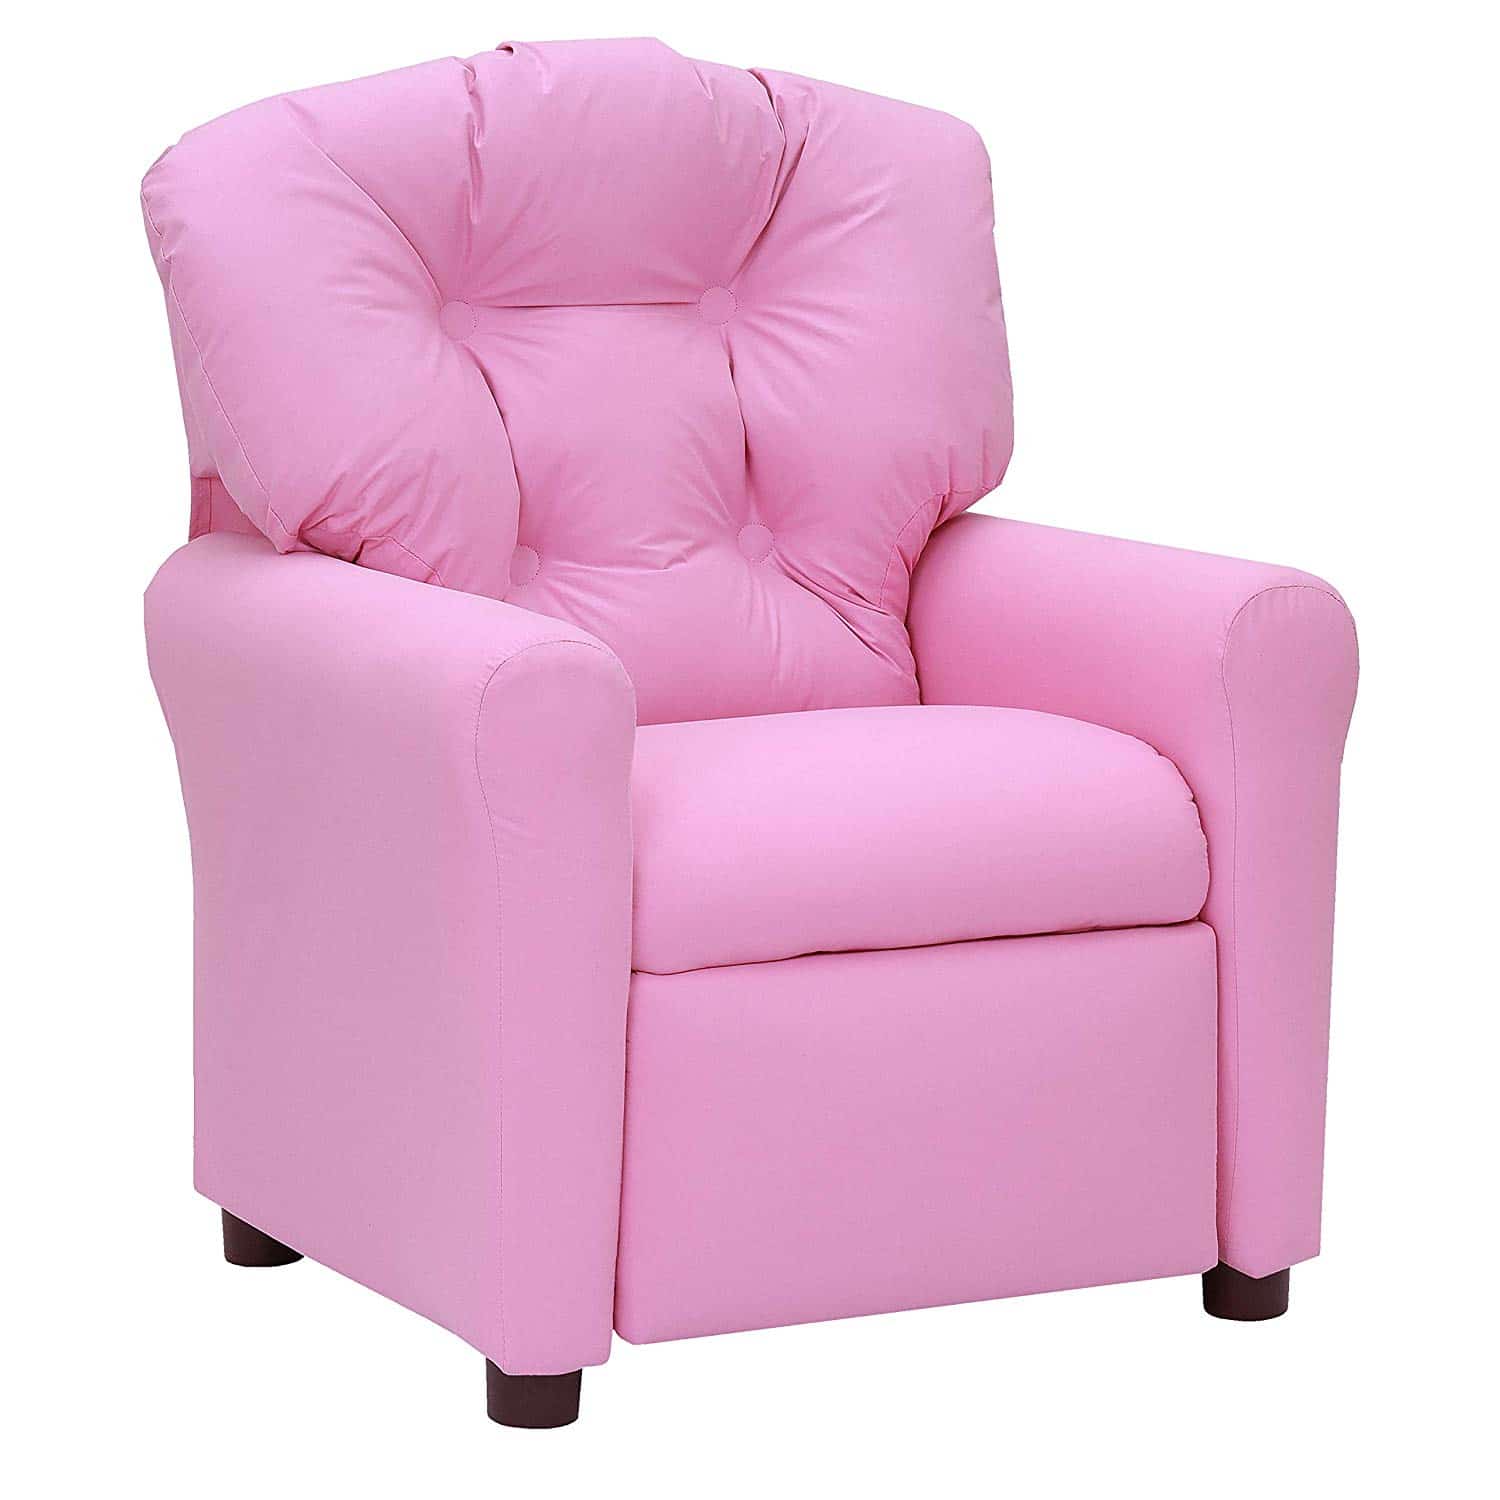 The Crew Furniture Kids Recliner Chair